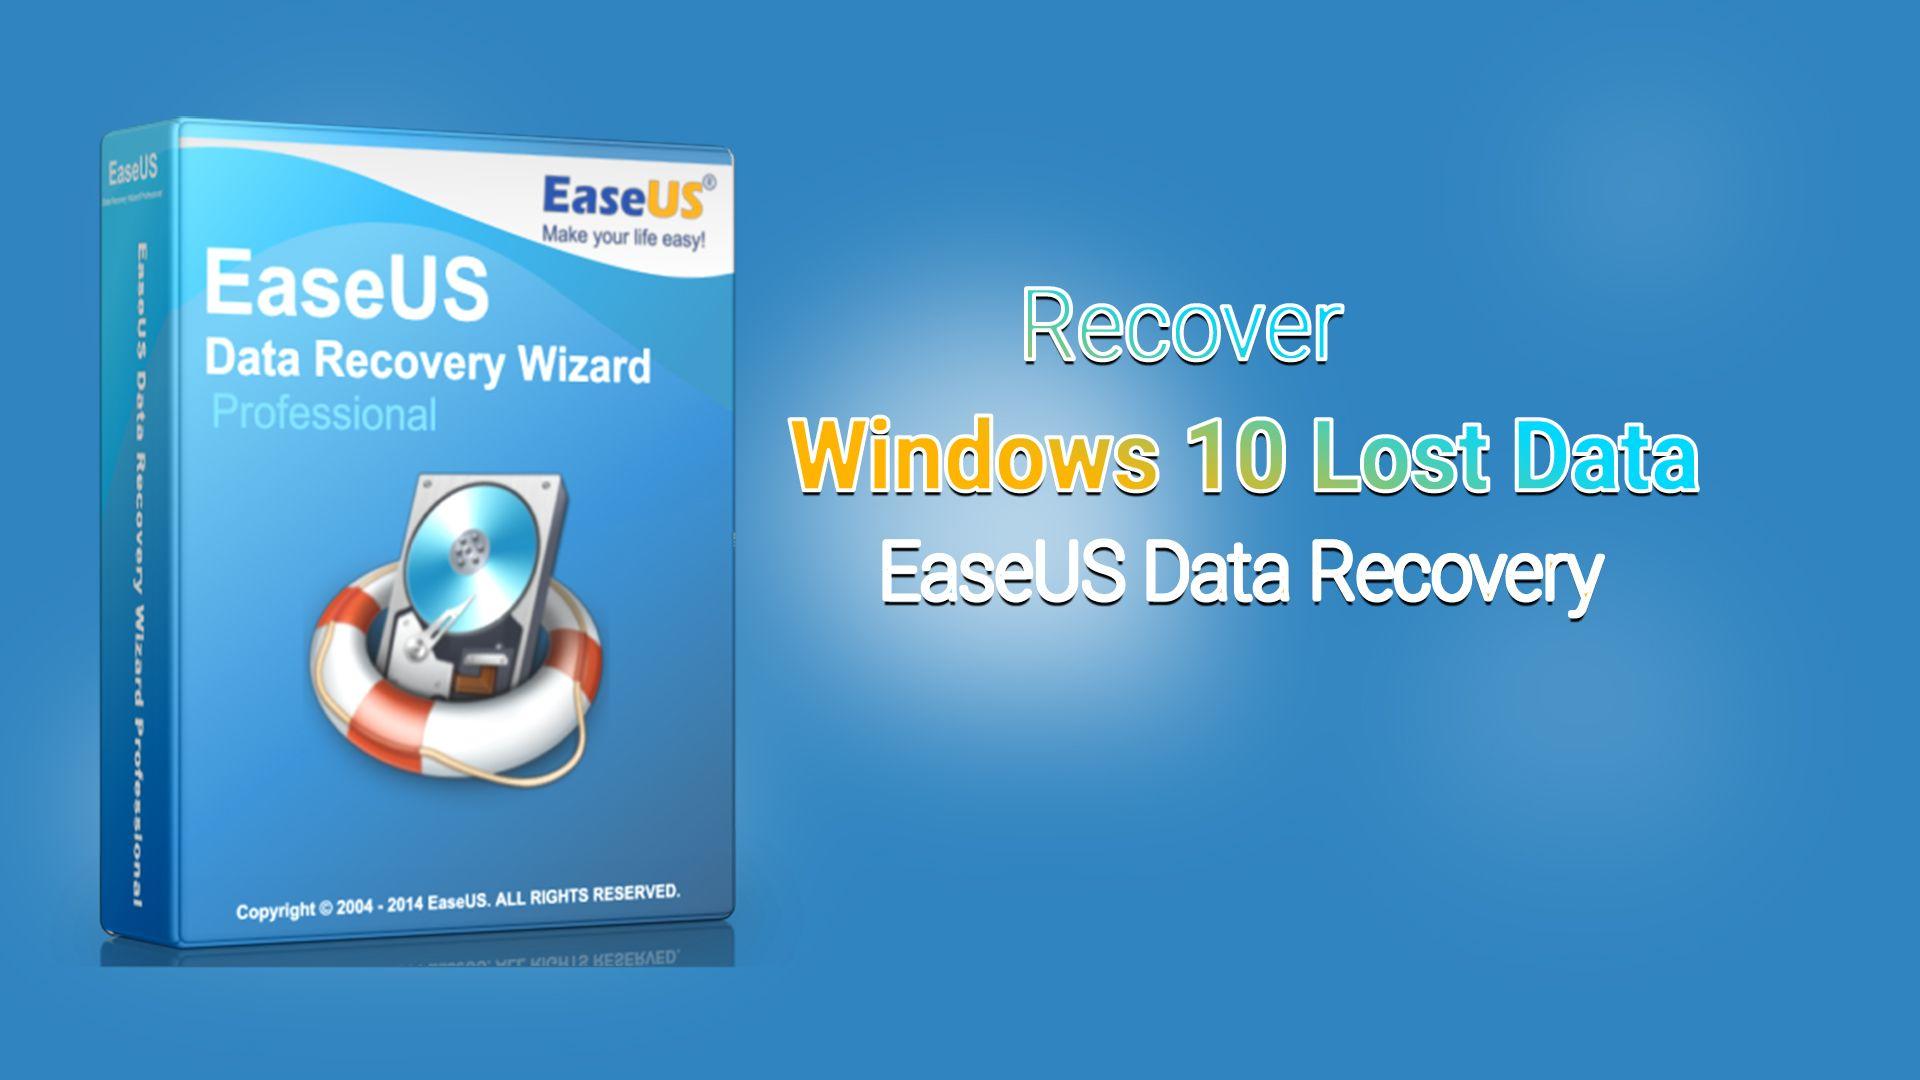 How To Recover Windows 10 Lost Data Via Easeus Data Recovery Wizard